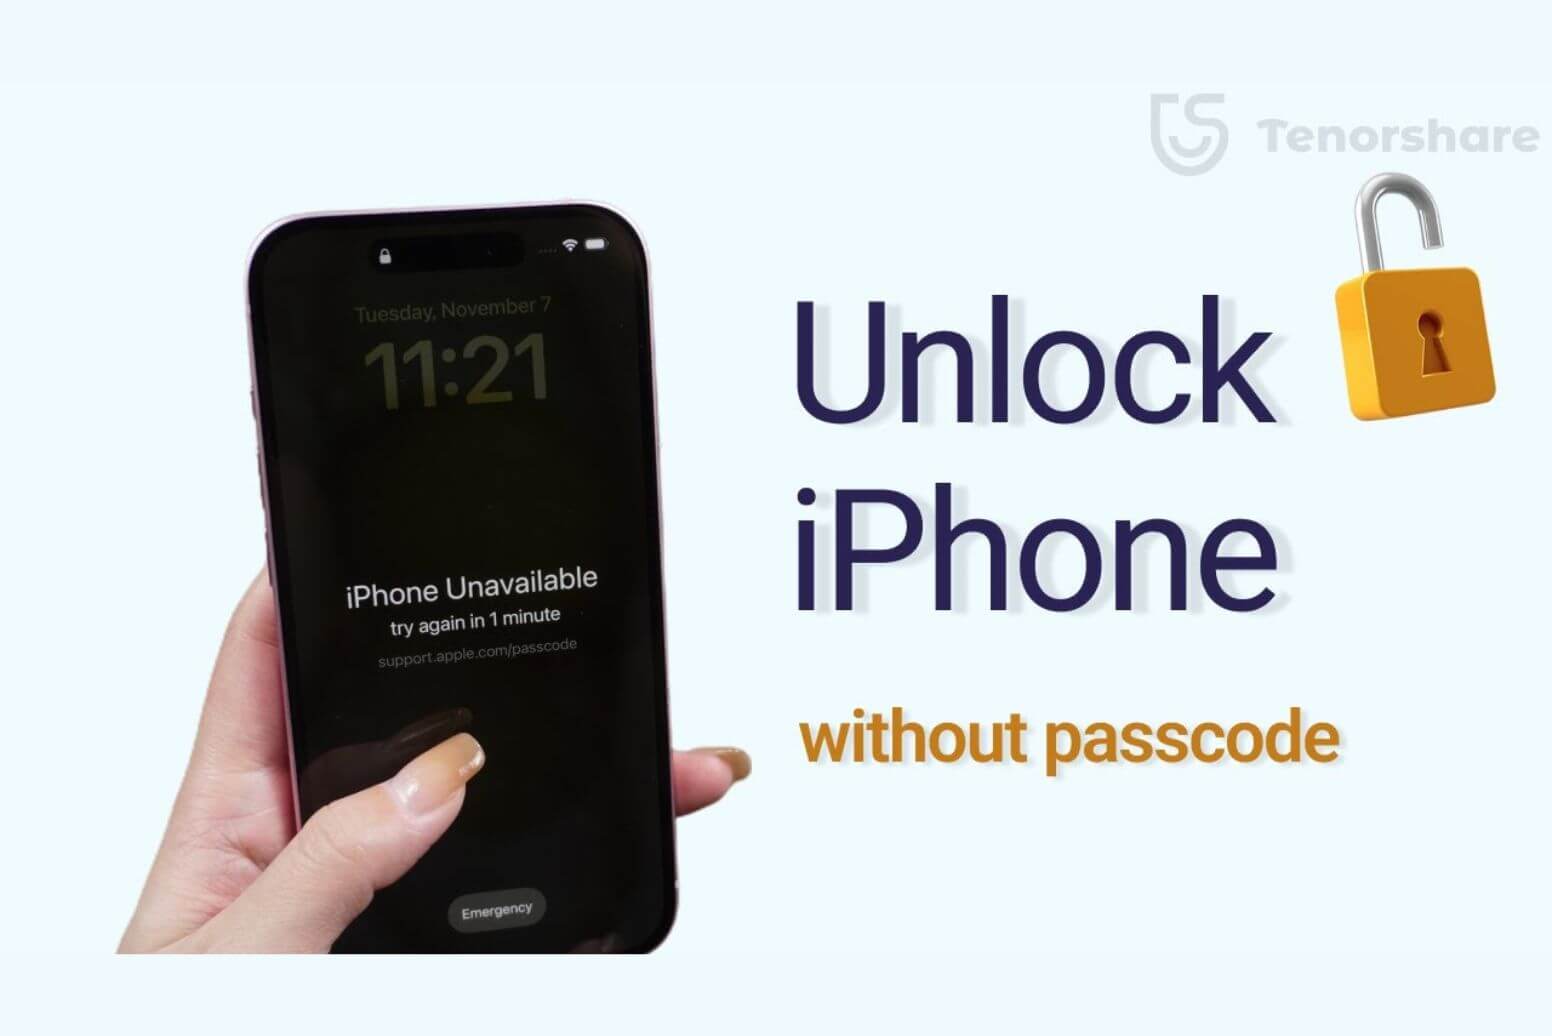 how to unlock iphone without passcode or face id